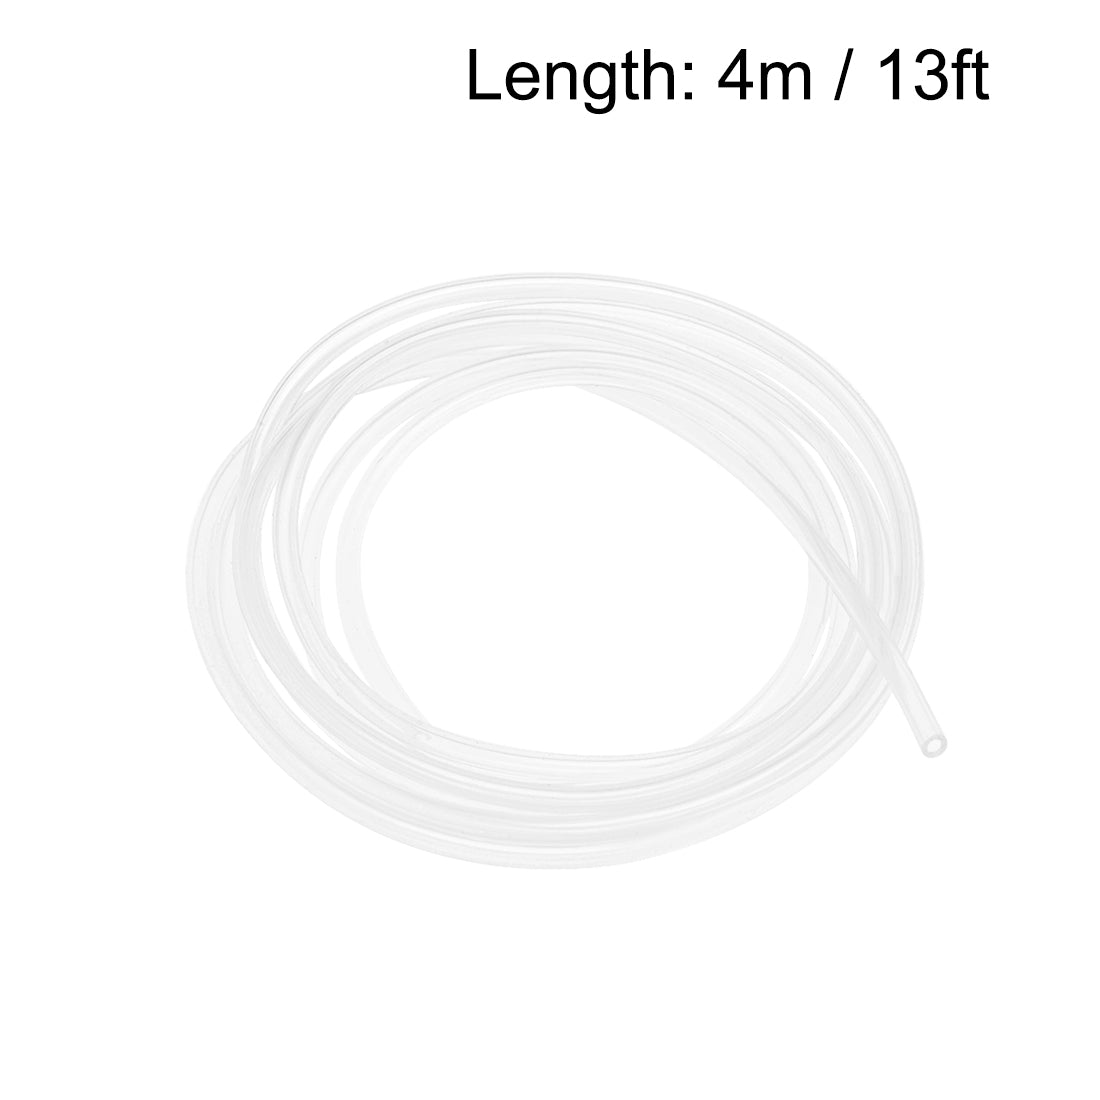 Uxcell Uxcell Silicone Tube, 3/8 inch ID x 1/2 inch OD 4m/13ft  Tubing Clear